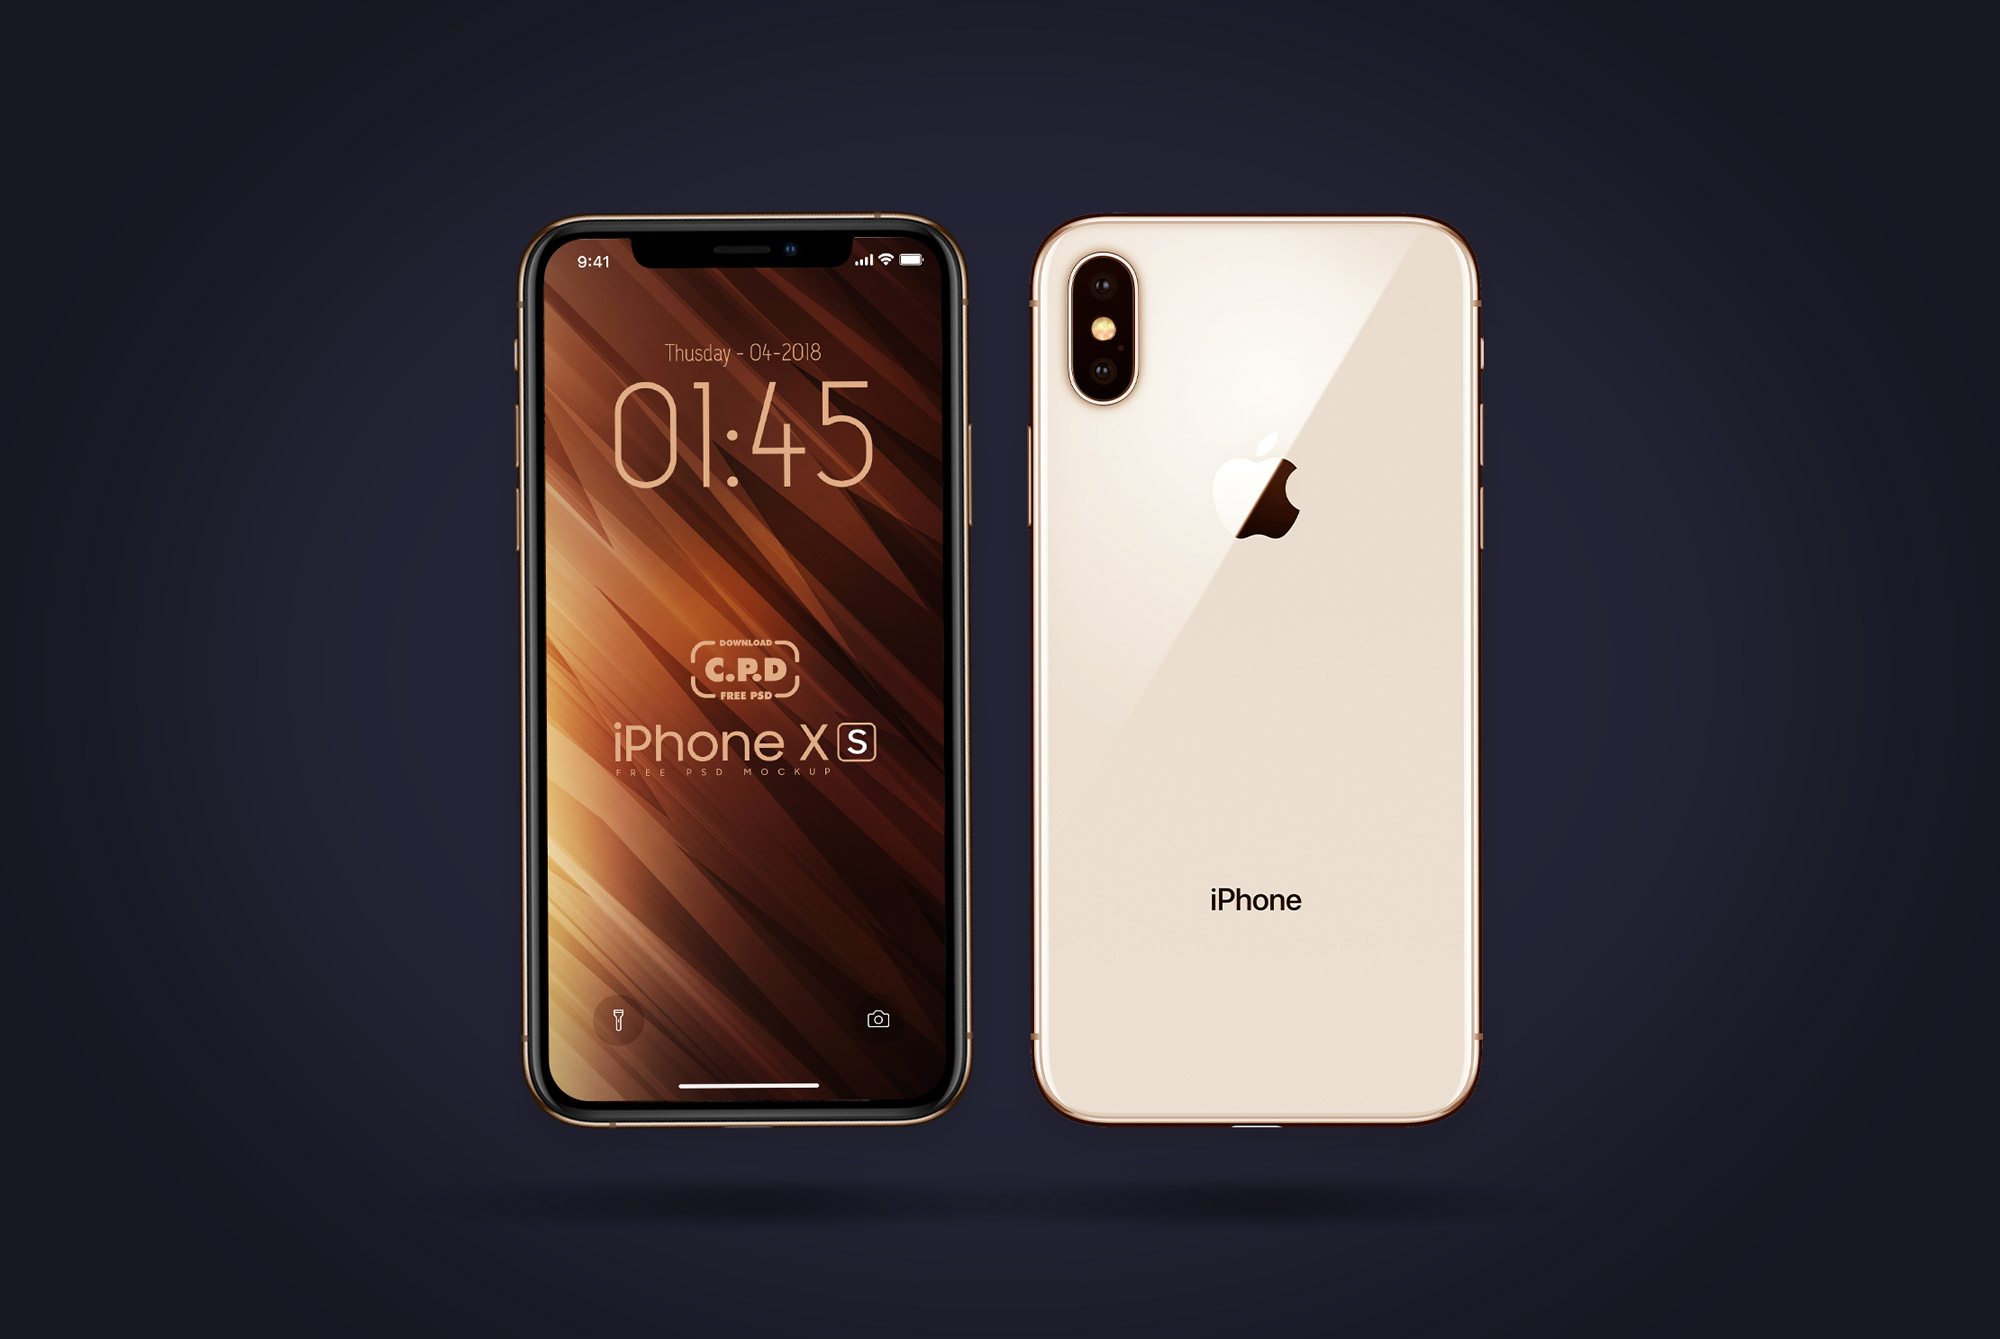 iphone-xs-front-back-mockup-free-psd.jpg